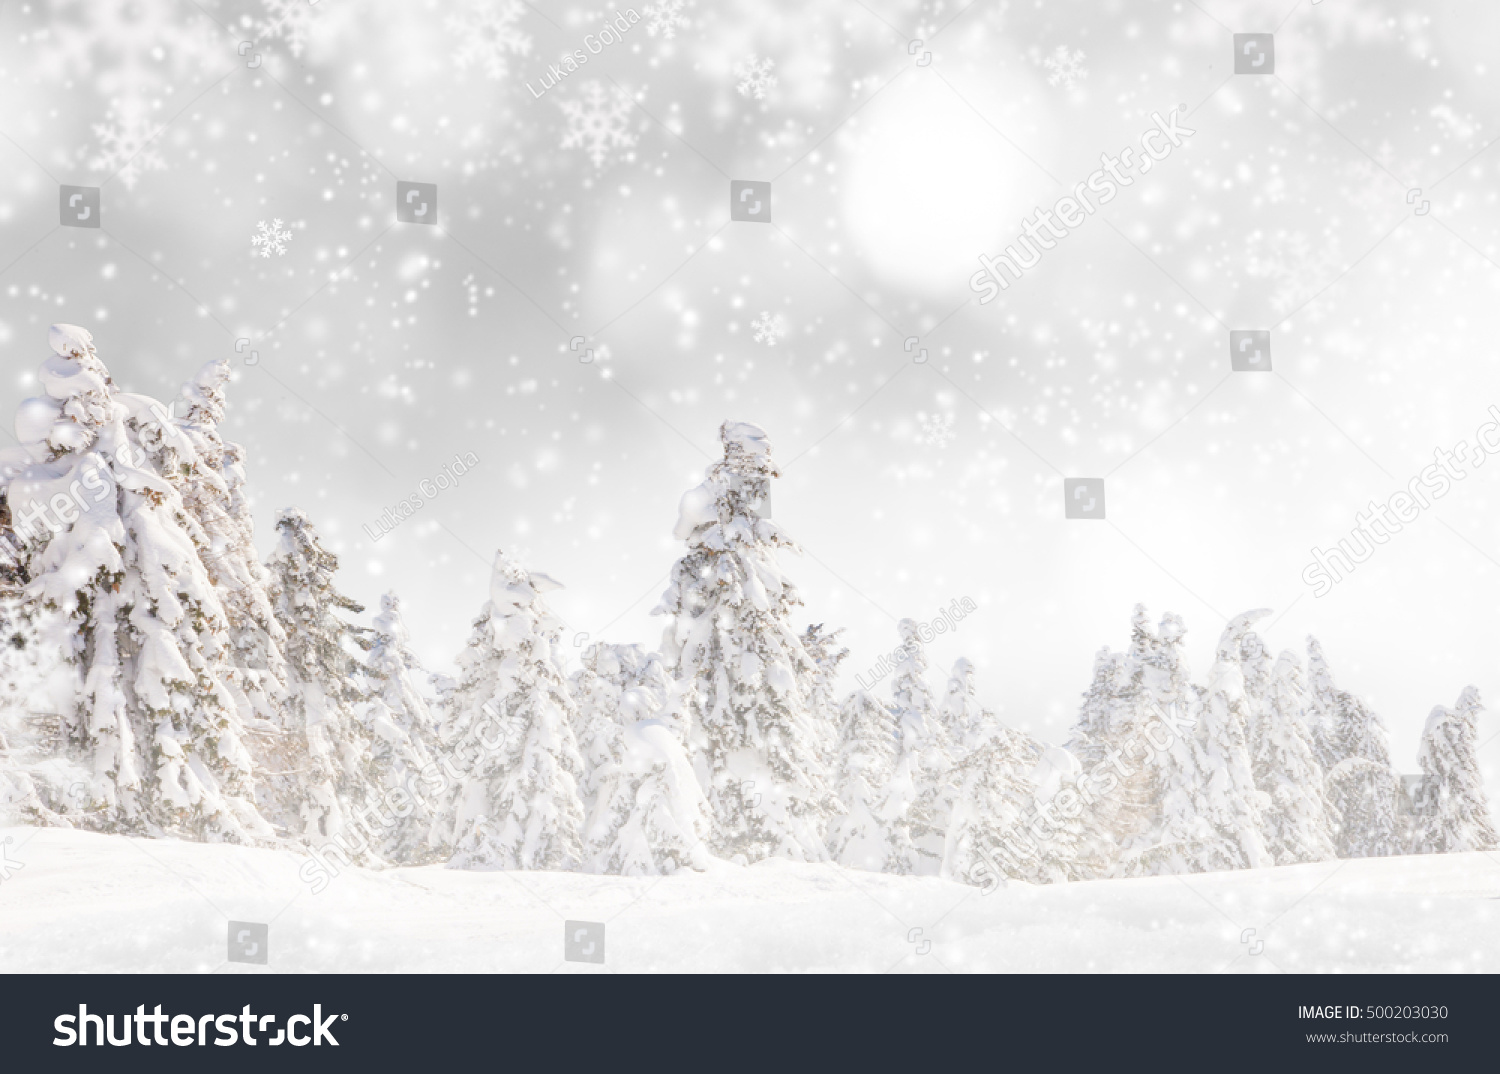 Christmas decoration on abstract background, close-up. #500203030